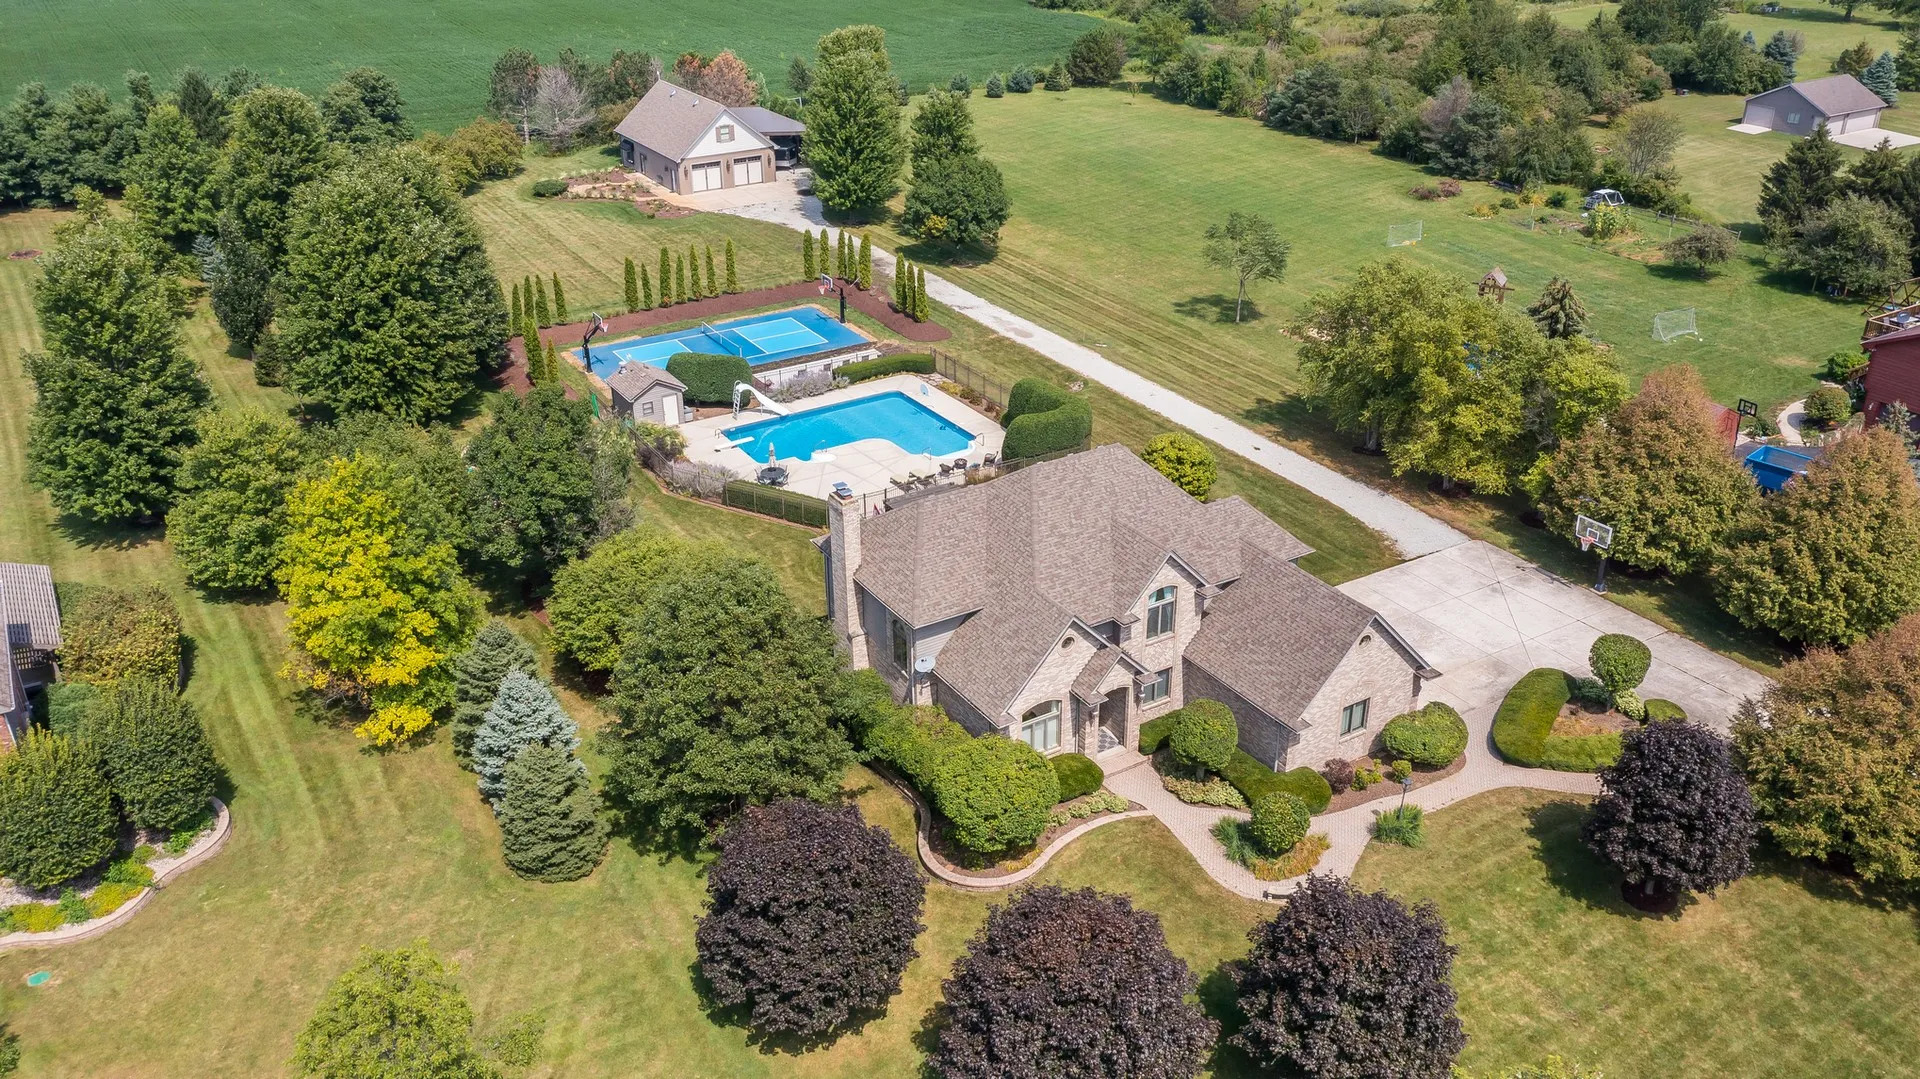 an aerial view of a house a garden and swimming pool